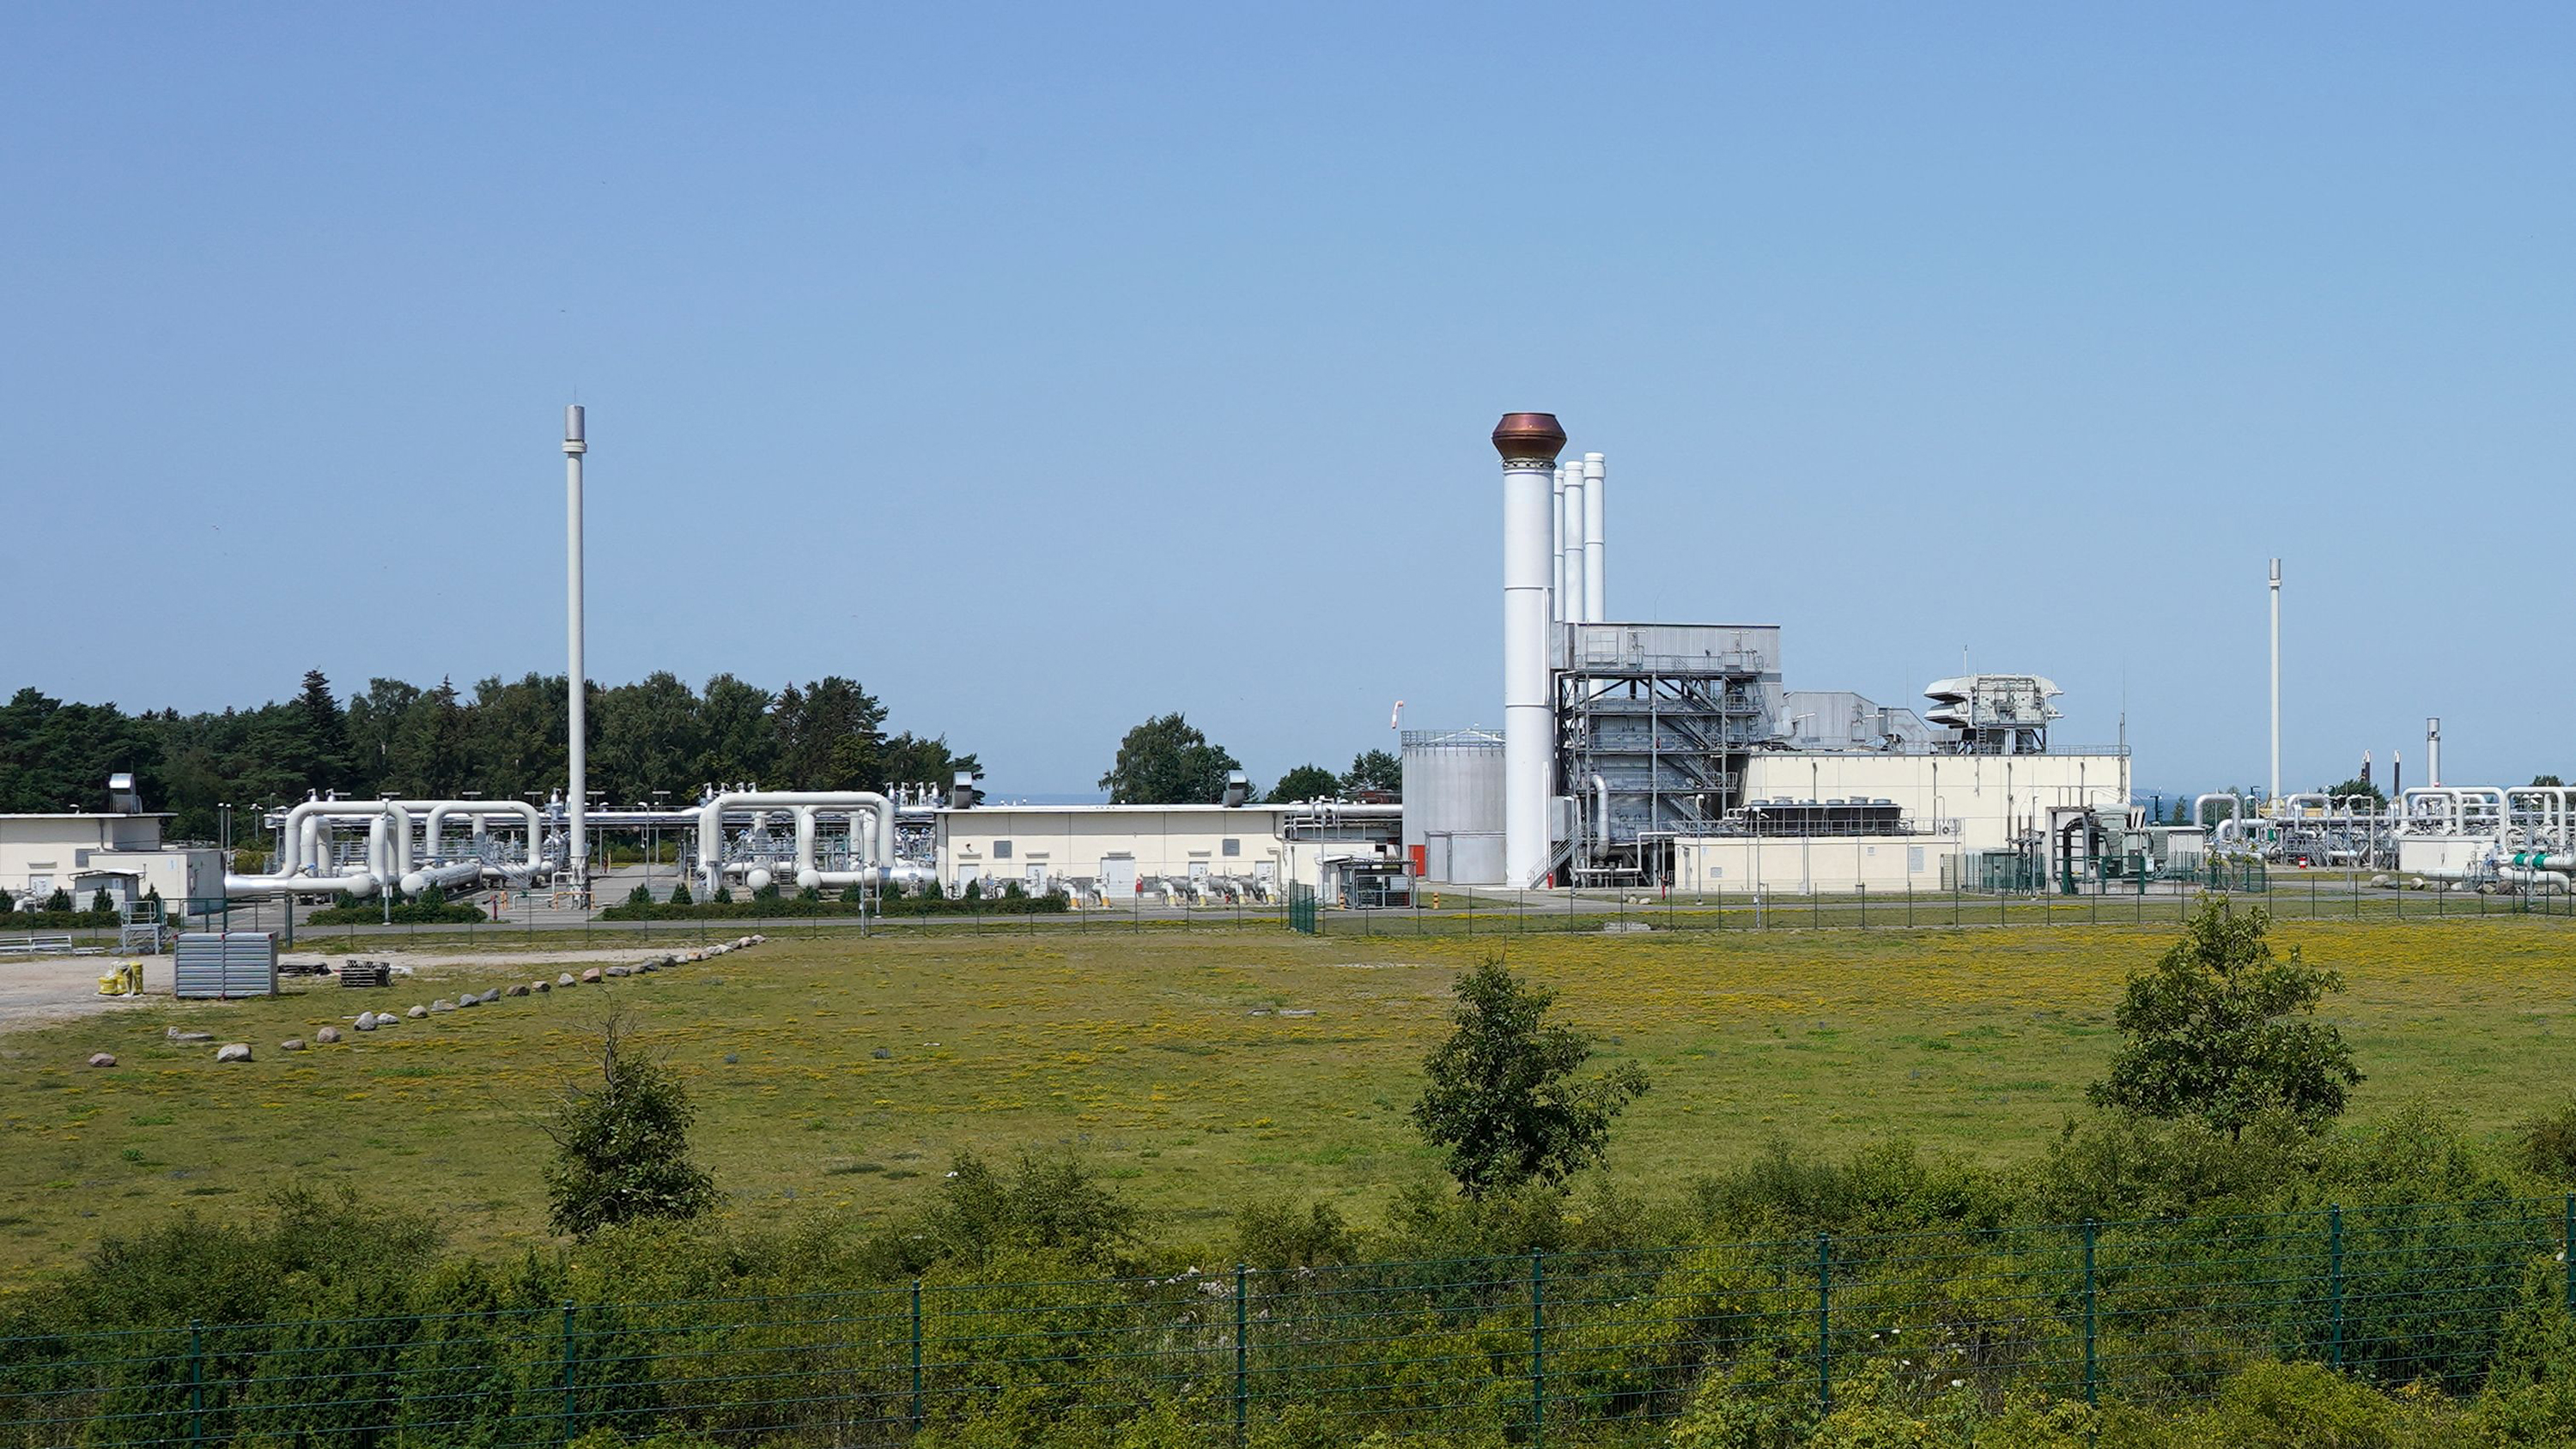 The industrial plant of the Nord Stream 1 in Lubmin, northeastern Germany.